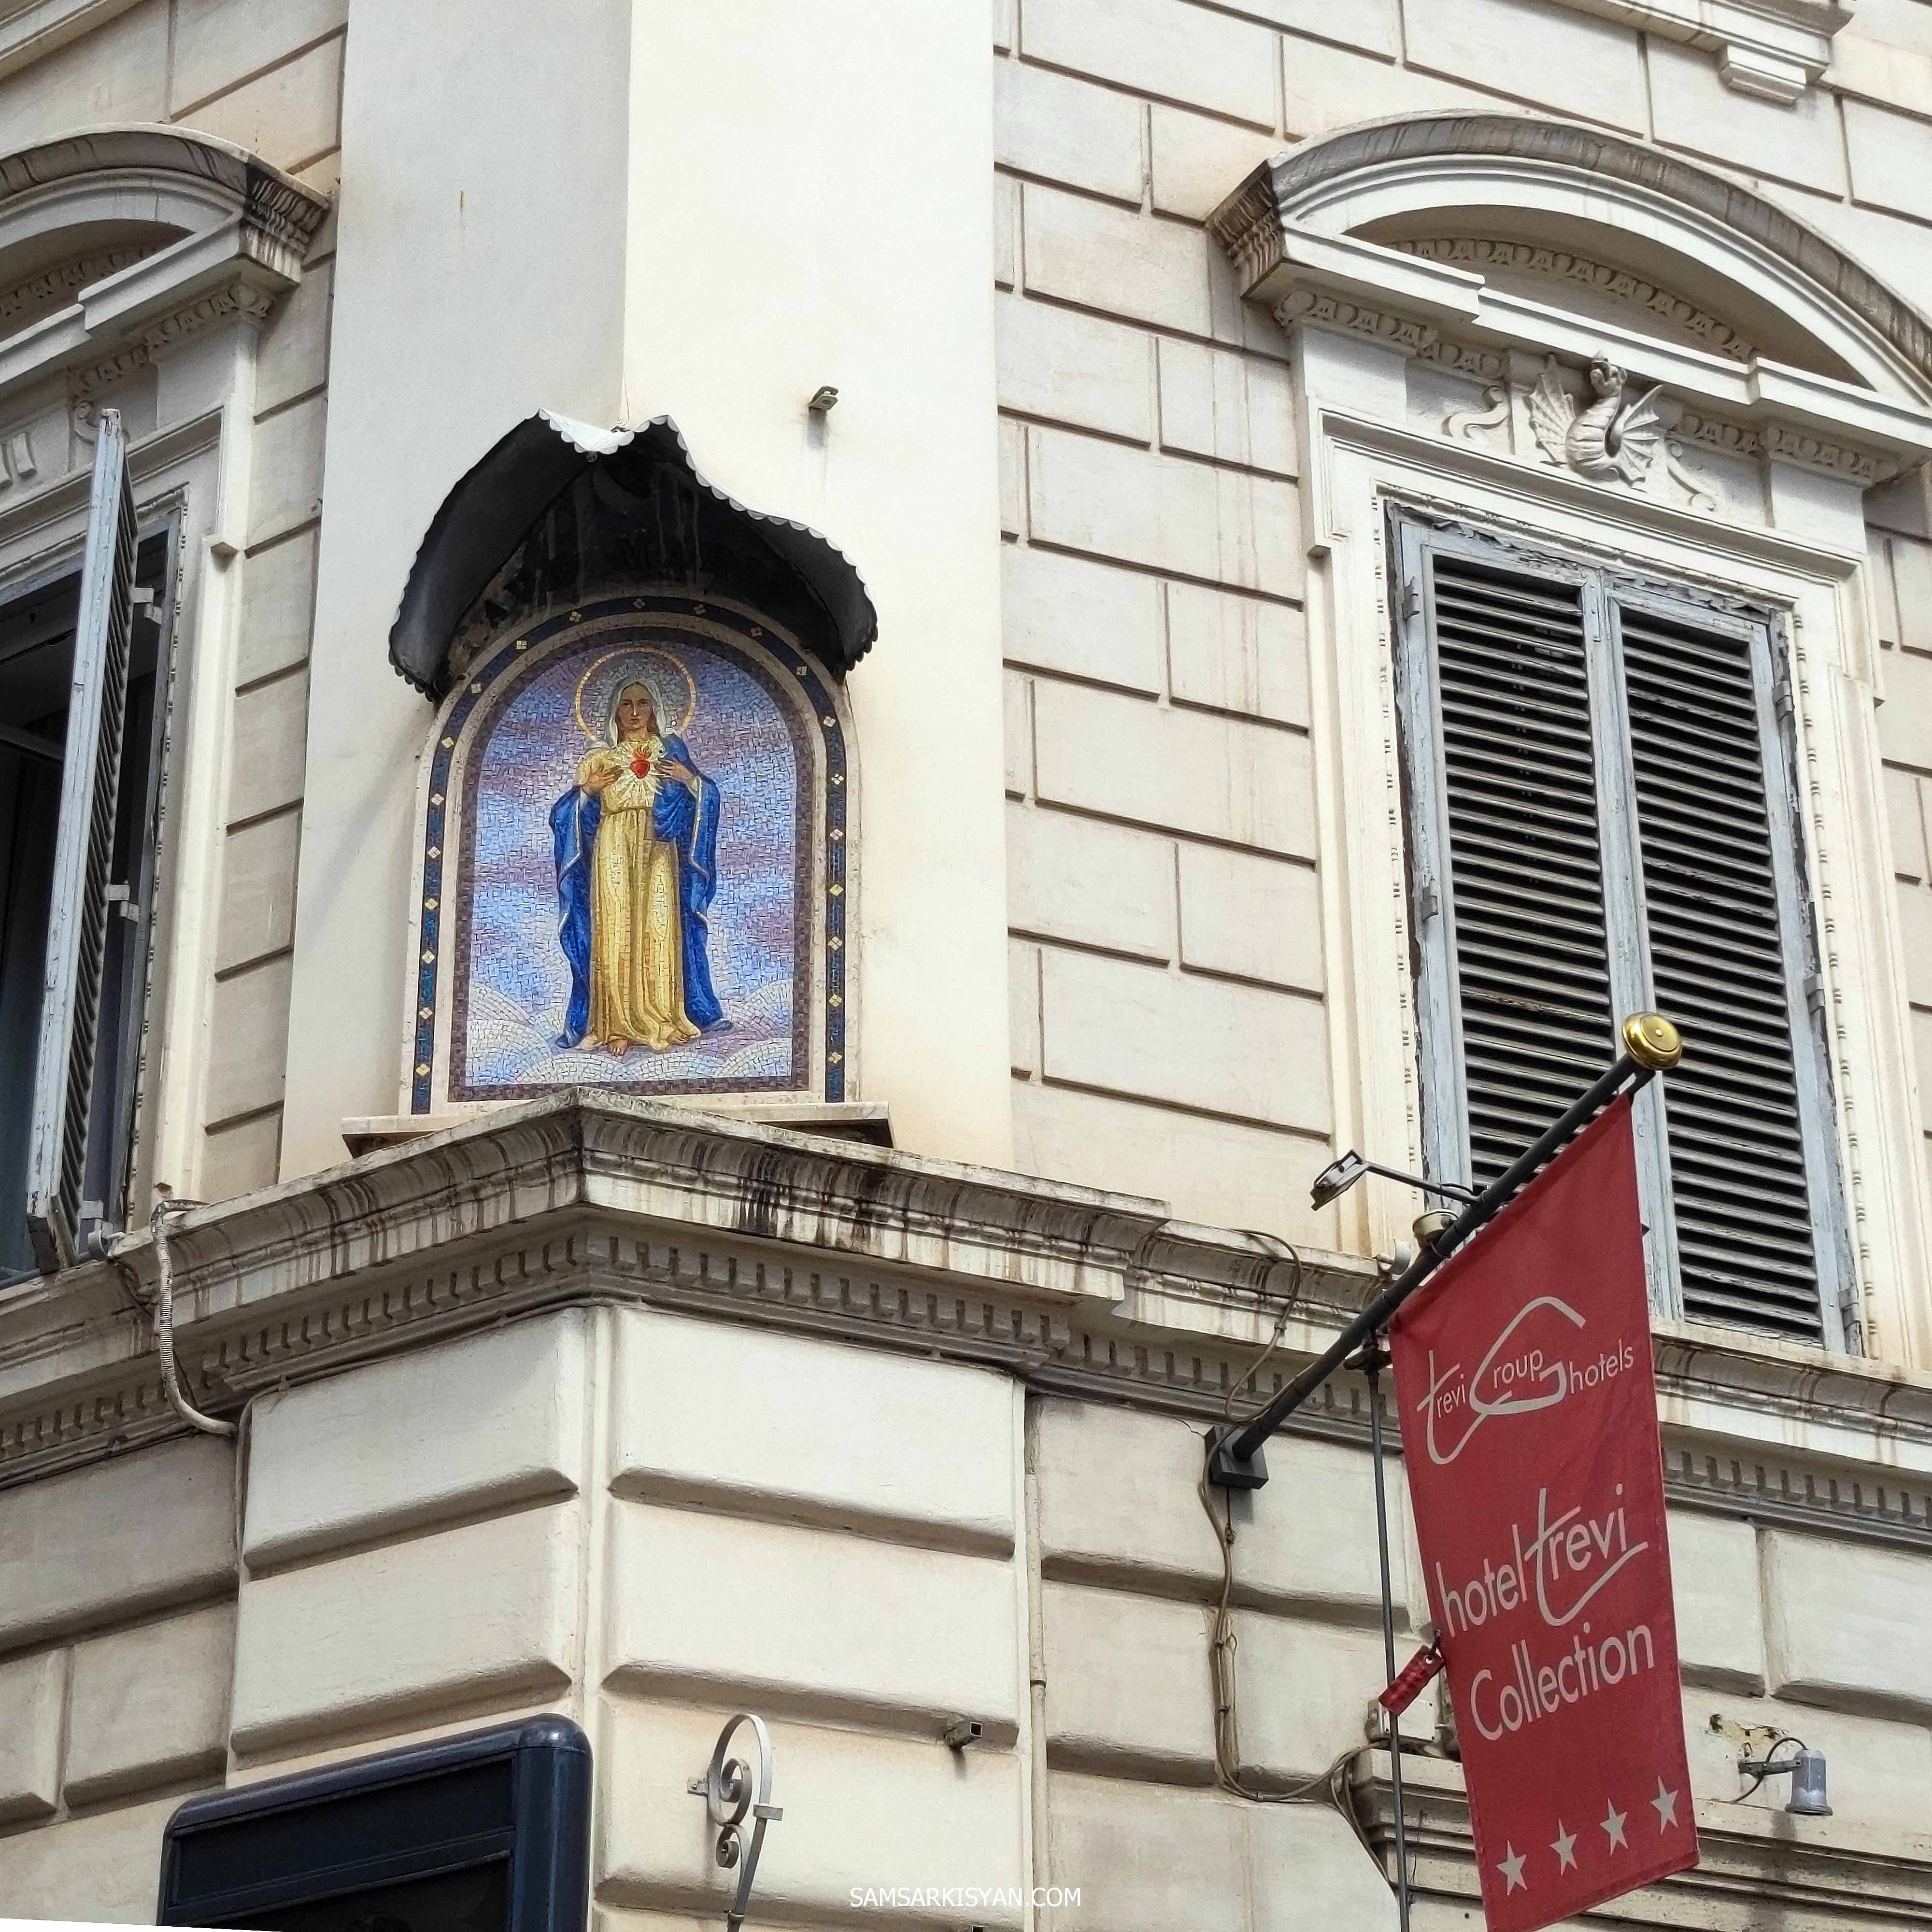 Decorations on the facades in Rome